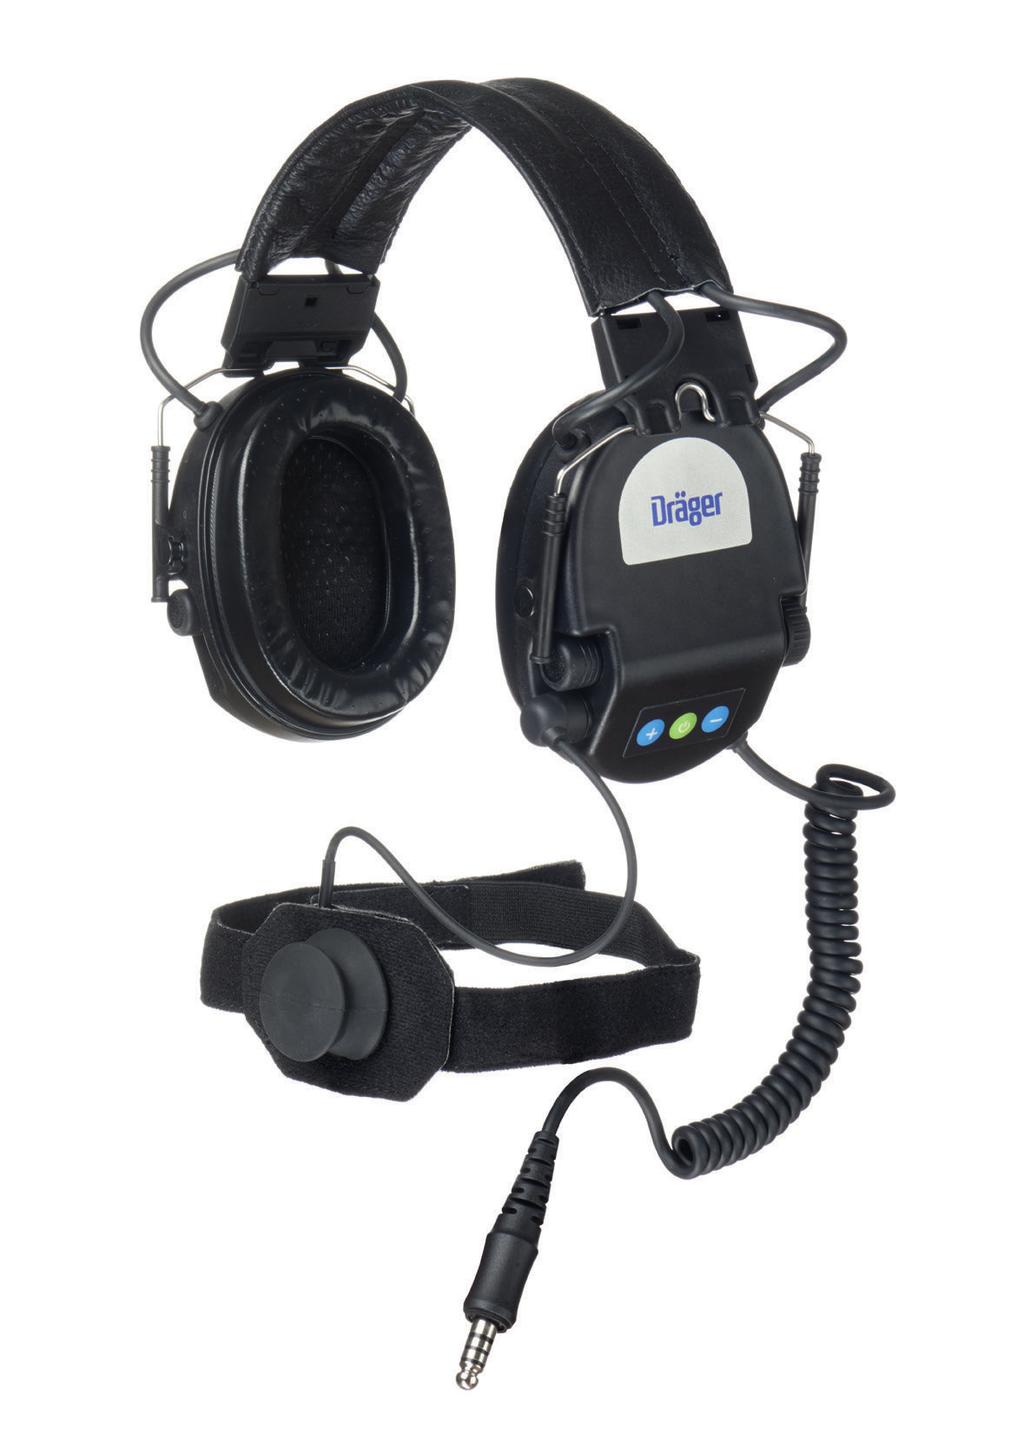 Dräger ANP-COM Communication unit Dräger ANP-COM is an integrated communication unit with active hearing protection It protects against loud, distracting background noises, while also allowing direct